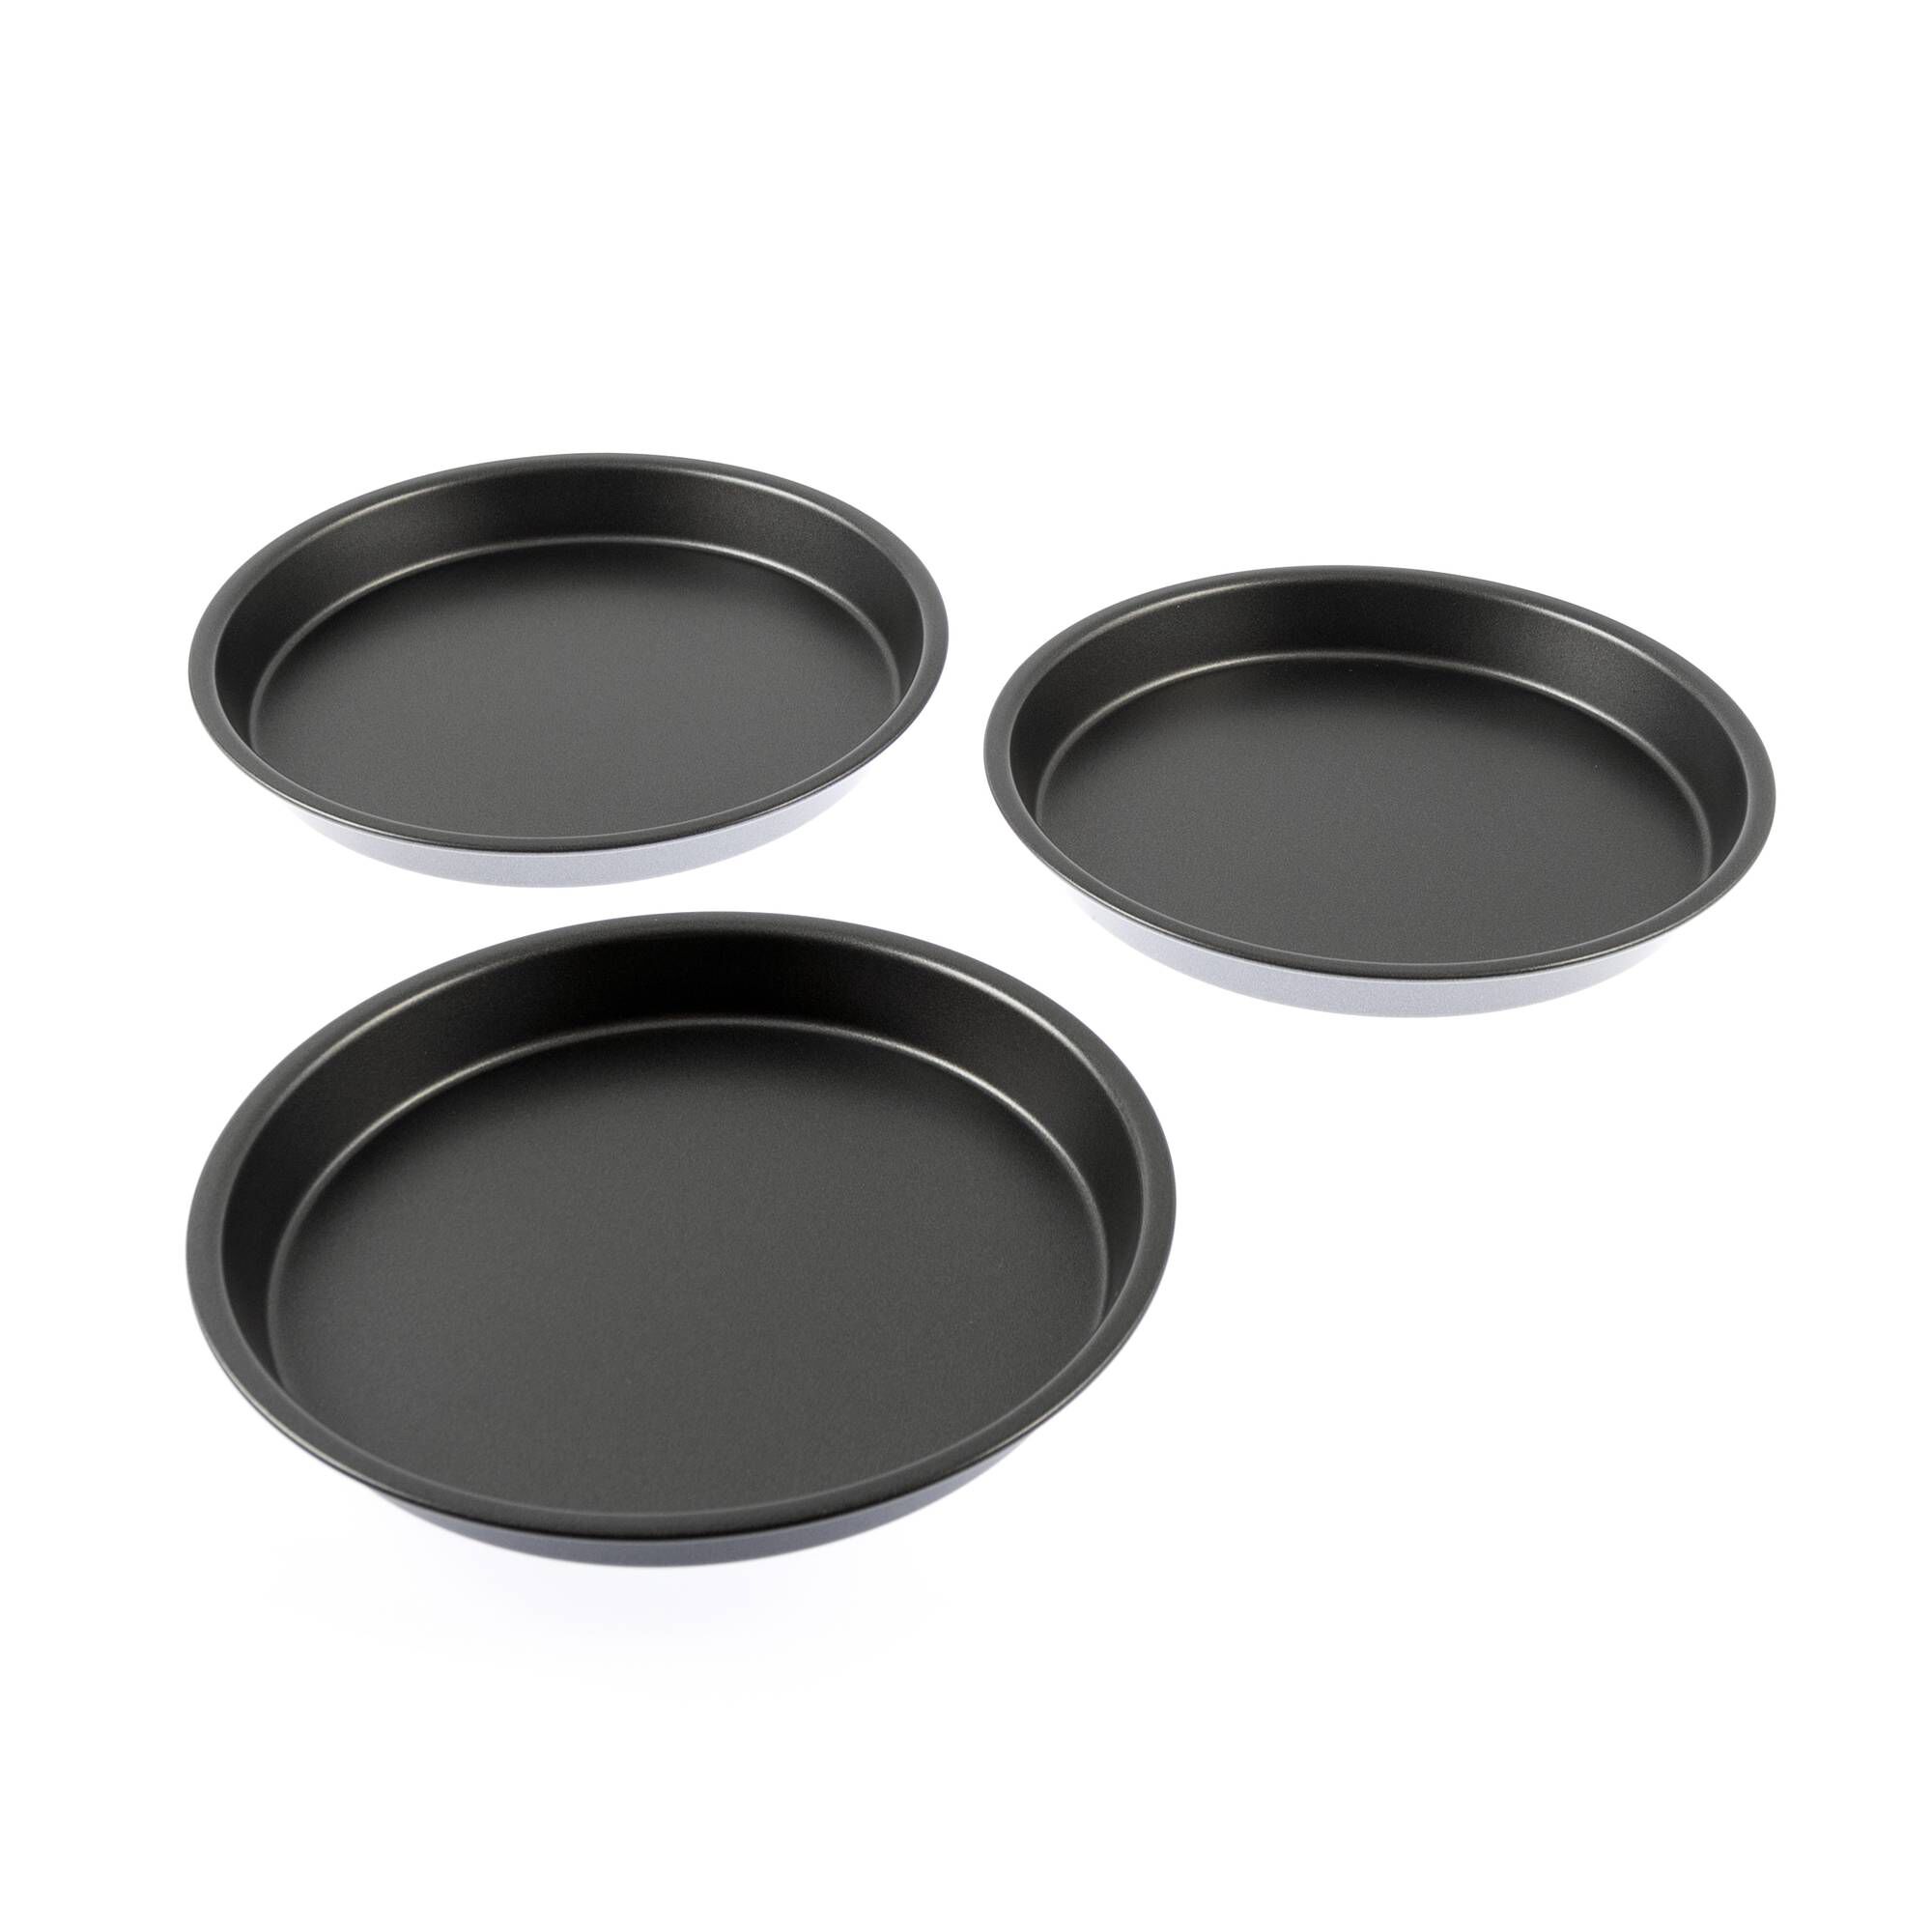 Buy 3 x Food Guru Round Non-Stick Cake Tin Pringform Pastry Mould Baking  Tin 20Cm Online | Brosa. Springform pans are so easy to use and removing  cakes from the tins has